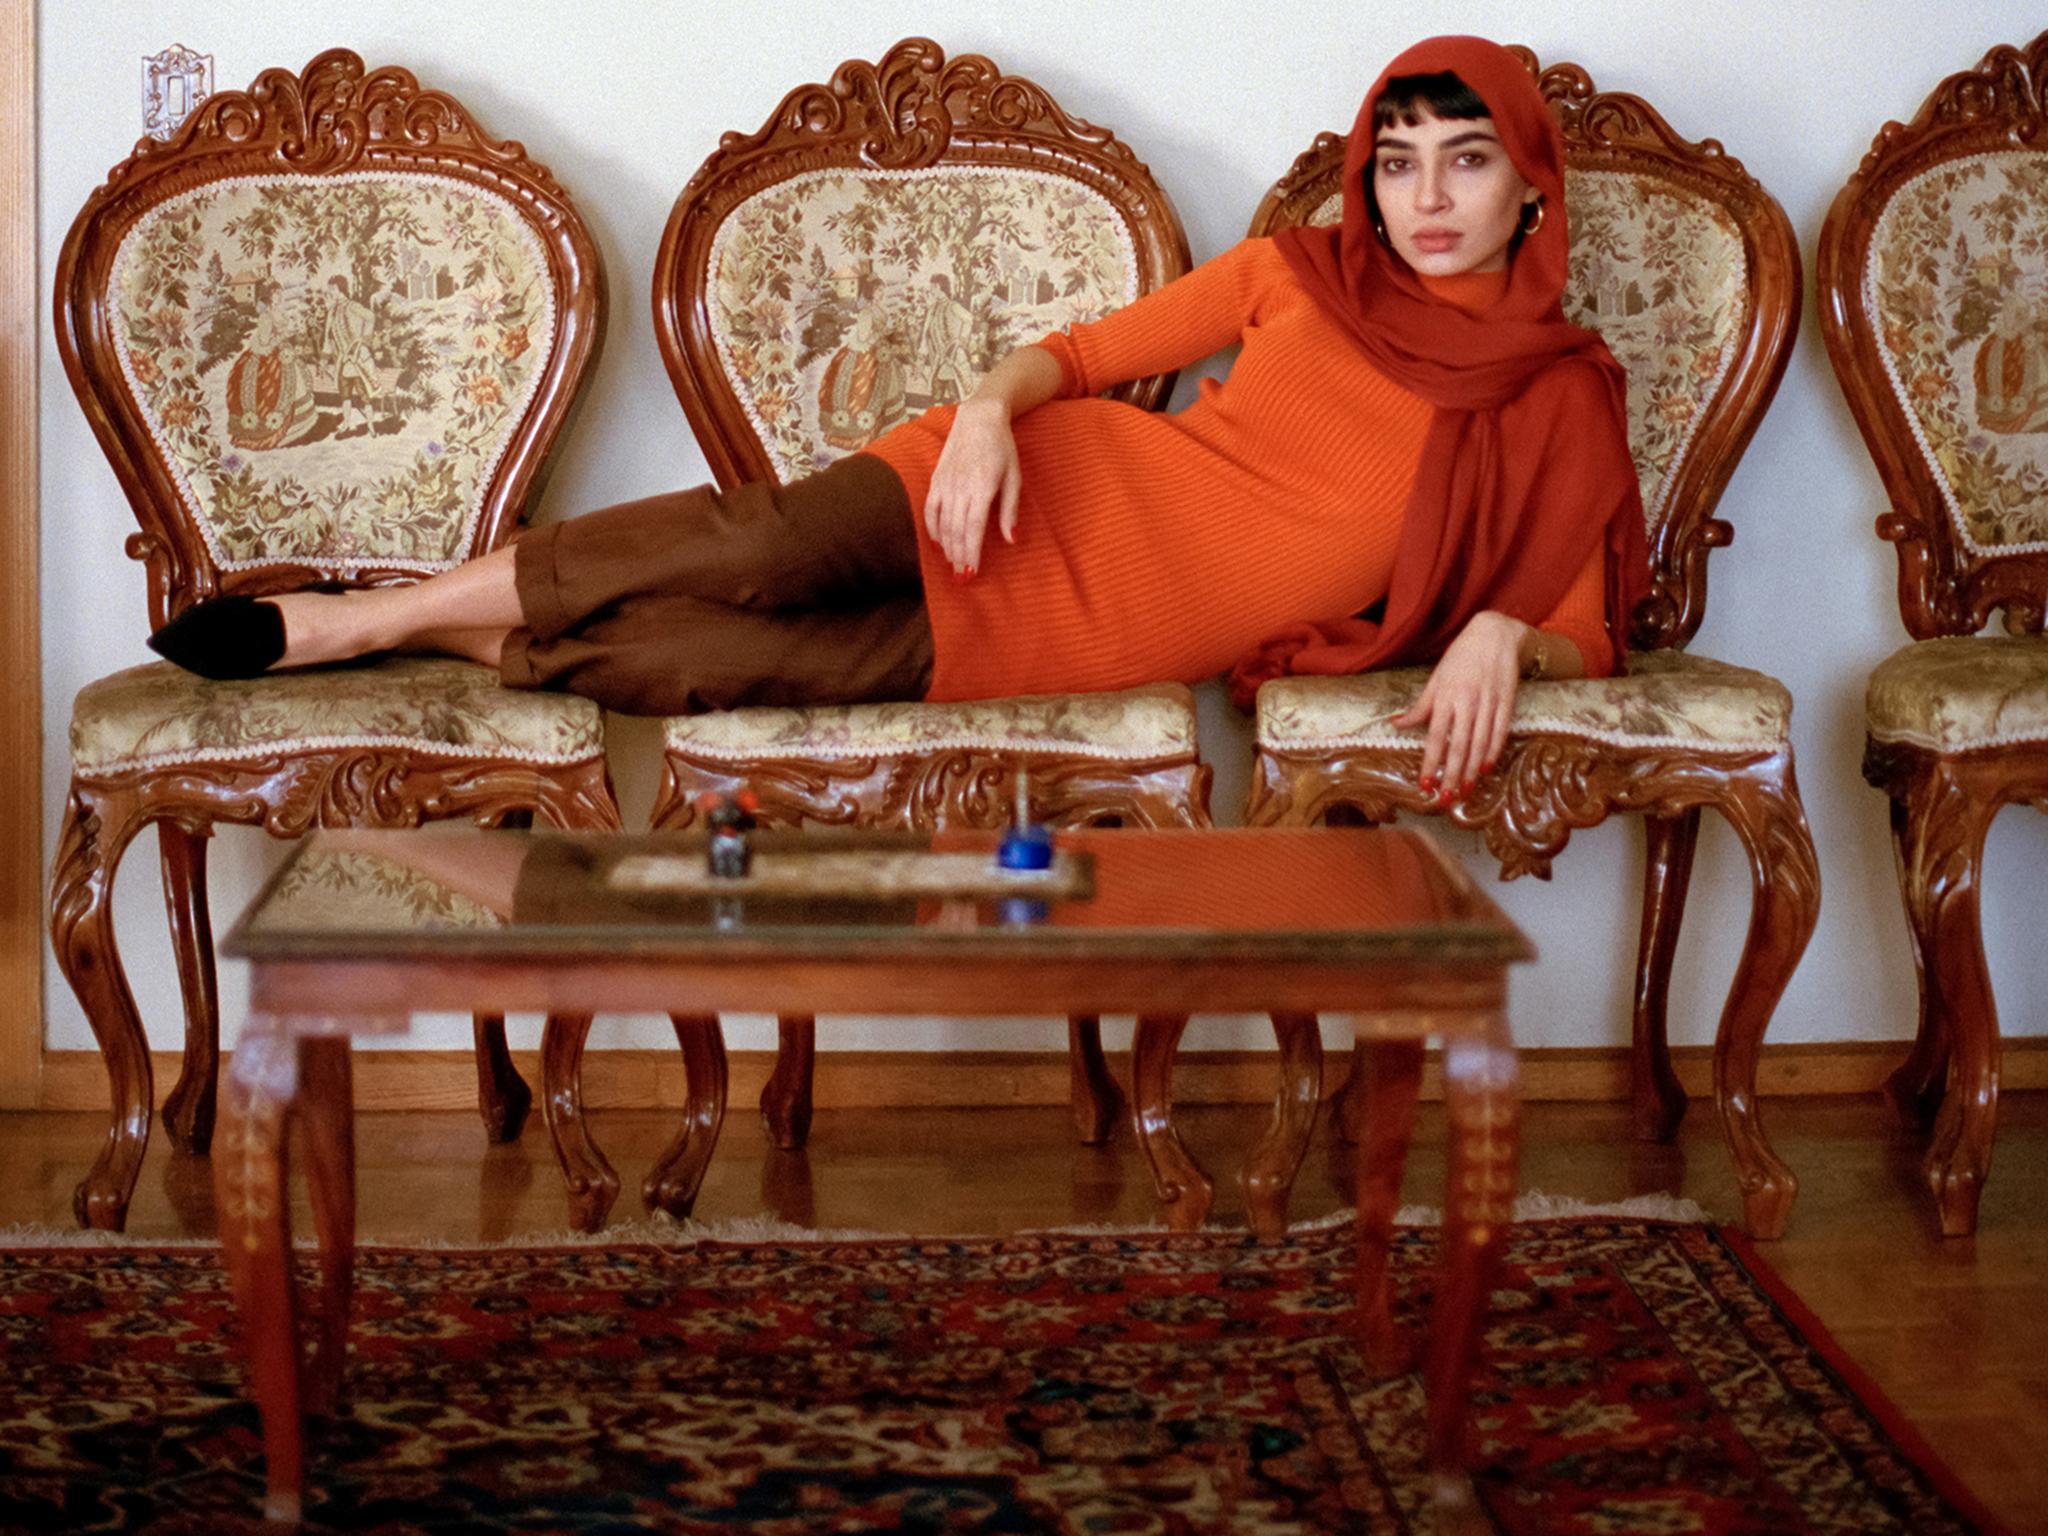 A woman poses in her home for Olzac Bozalp